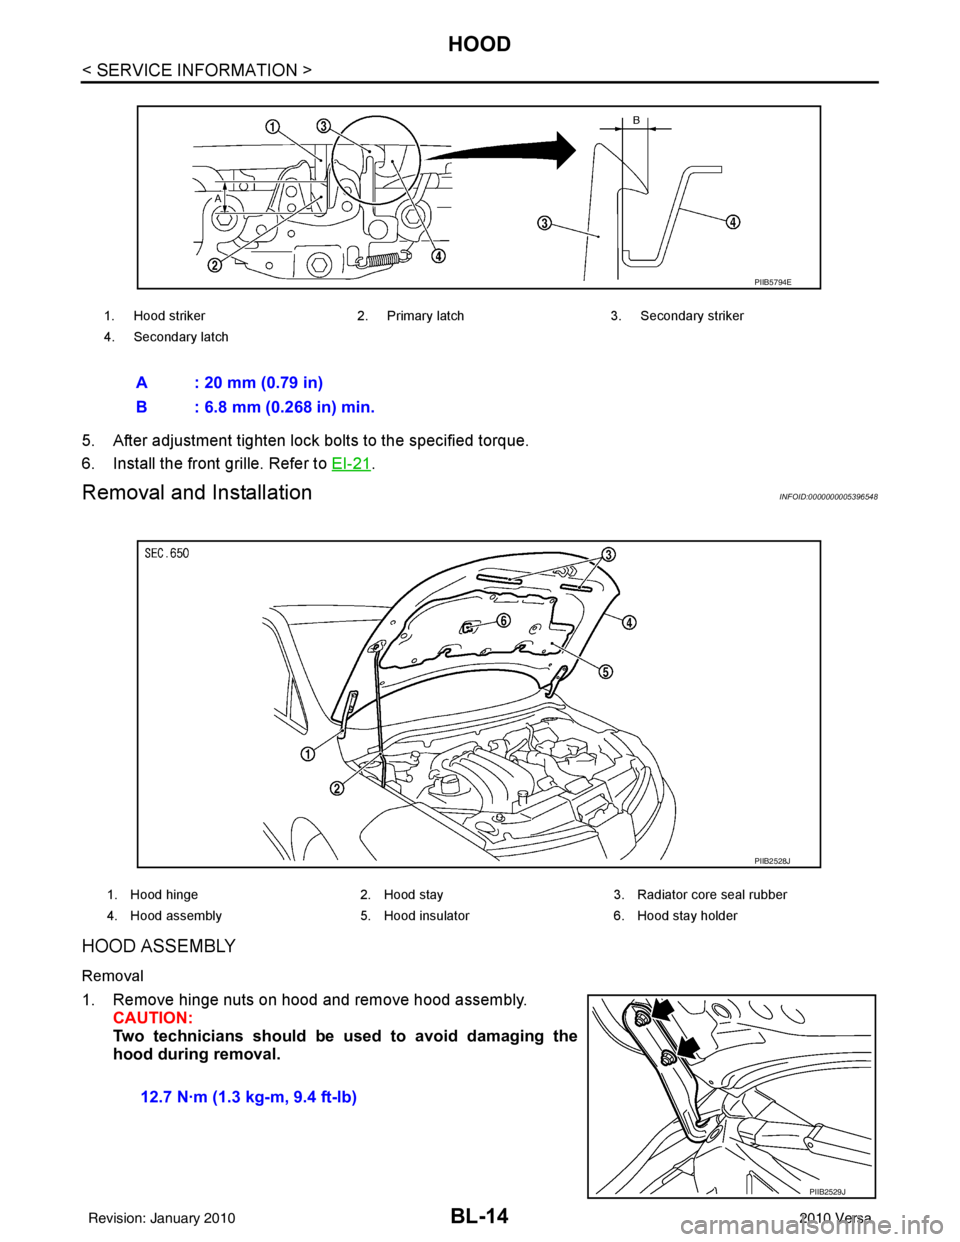 NISSAN TIIDA 2010  Service Repair Manual BL-14
< SERVICE INFORMATION >
HOOD
5. After adjustment tighten lock bolts to the specified torque.
6. Install the front grille. Refer to EI-21
.
Removal and InstallationINFOID:0000000005396548
HOOD AS